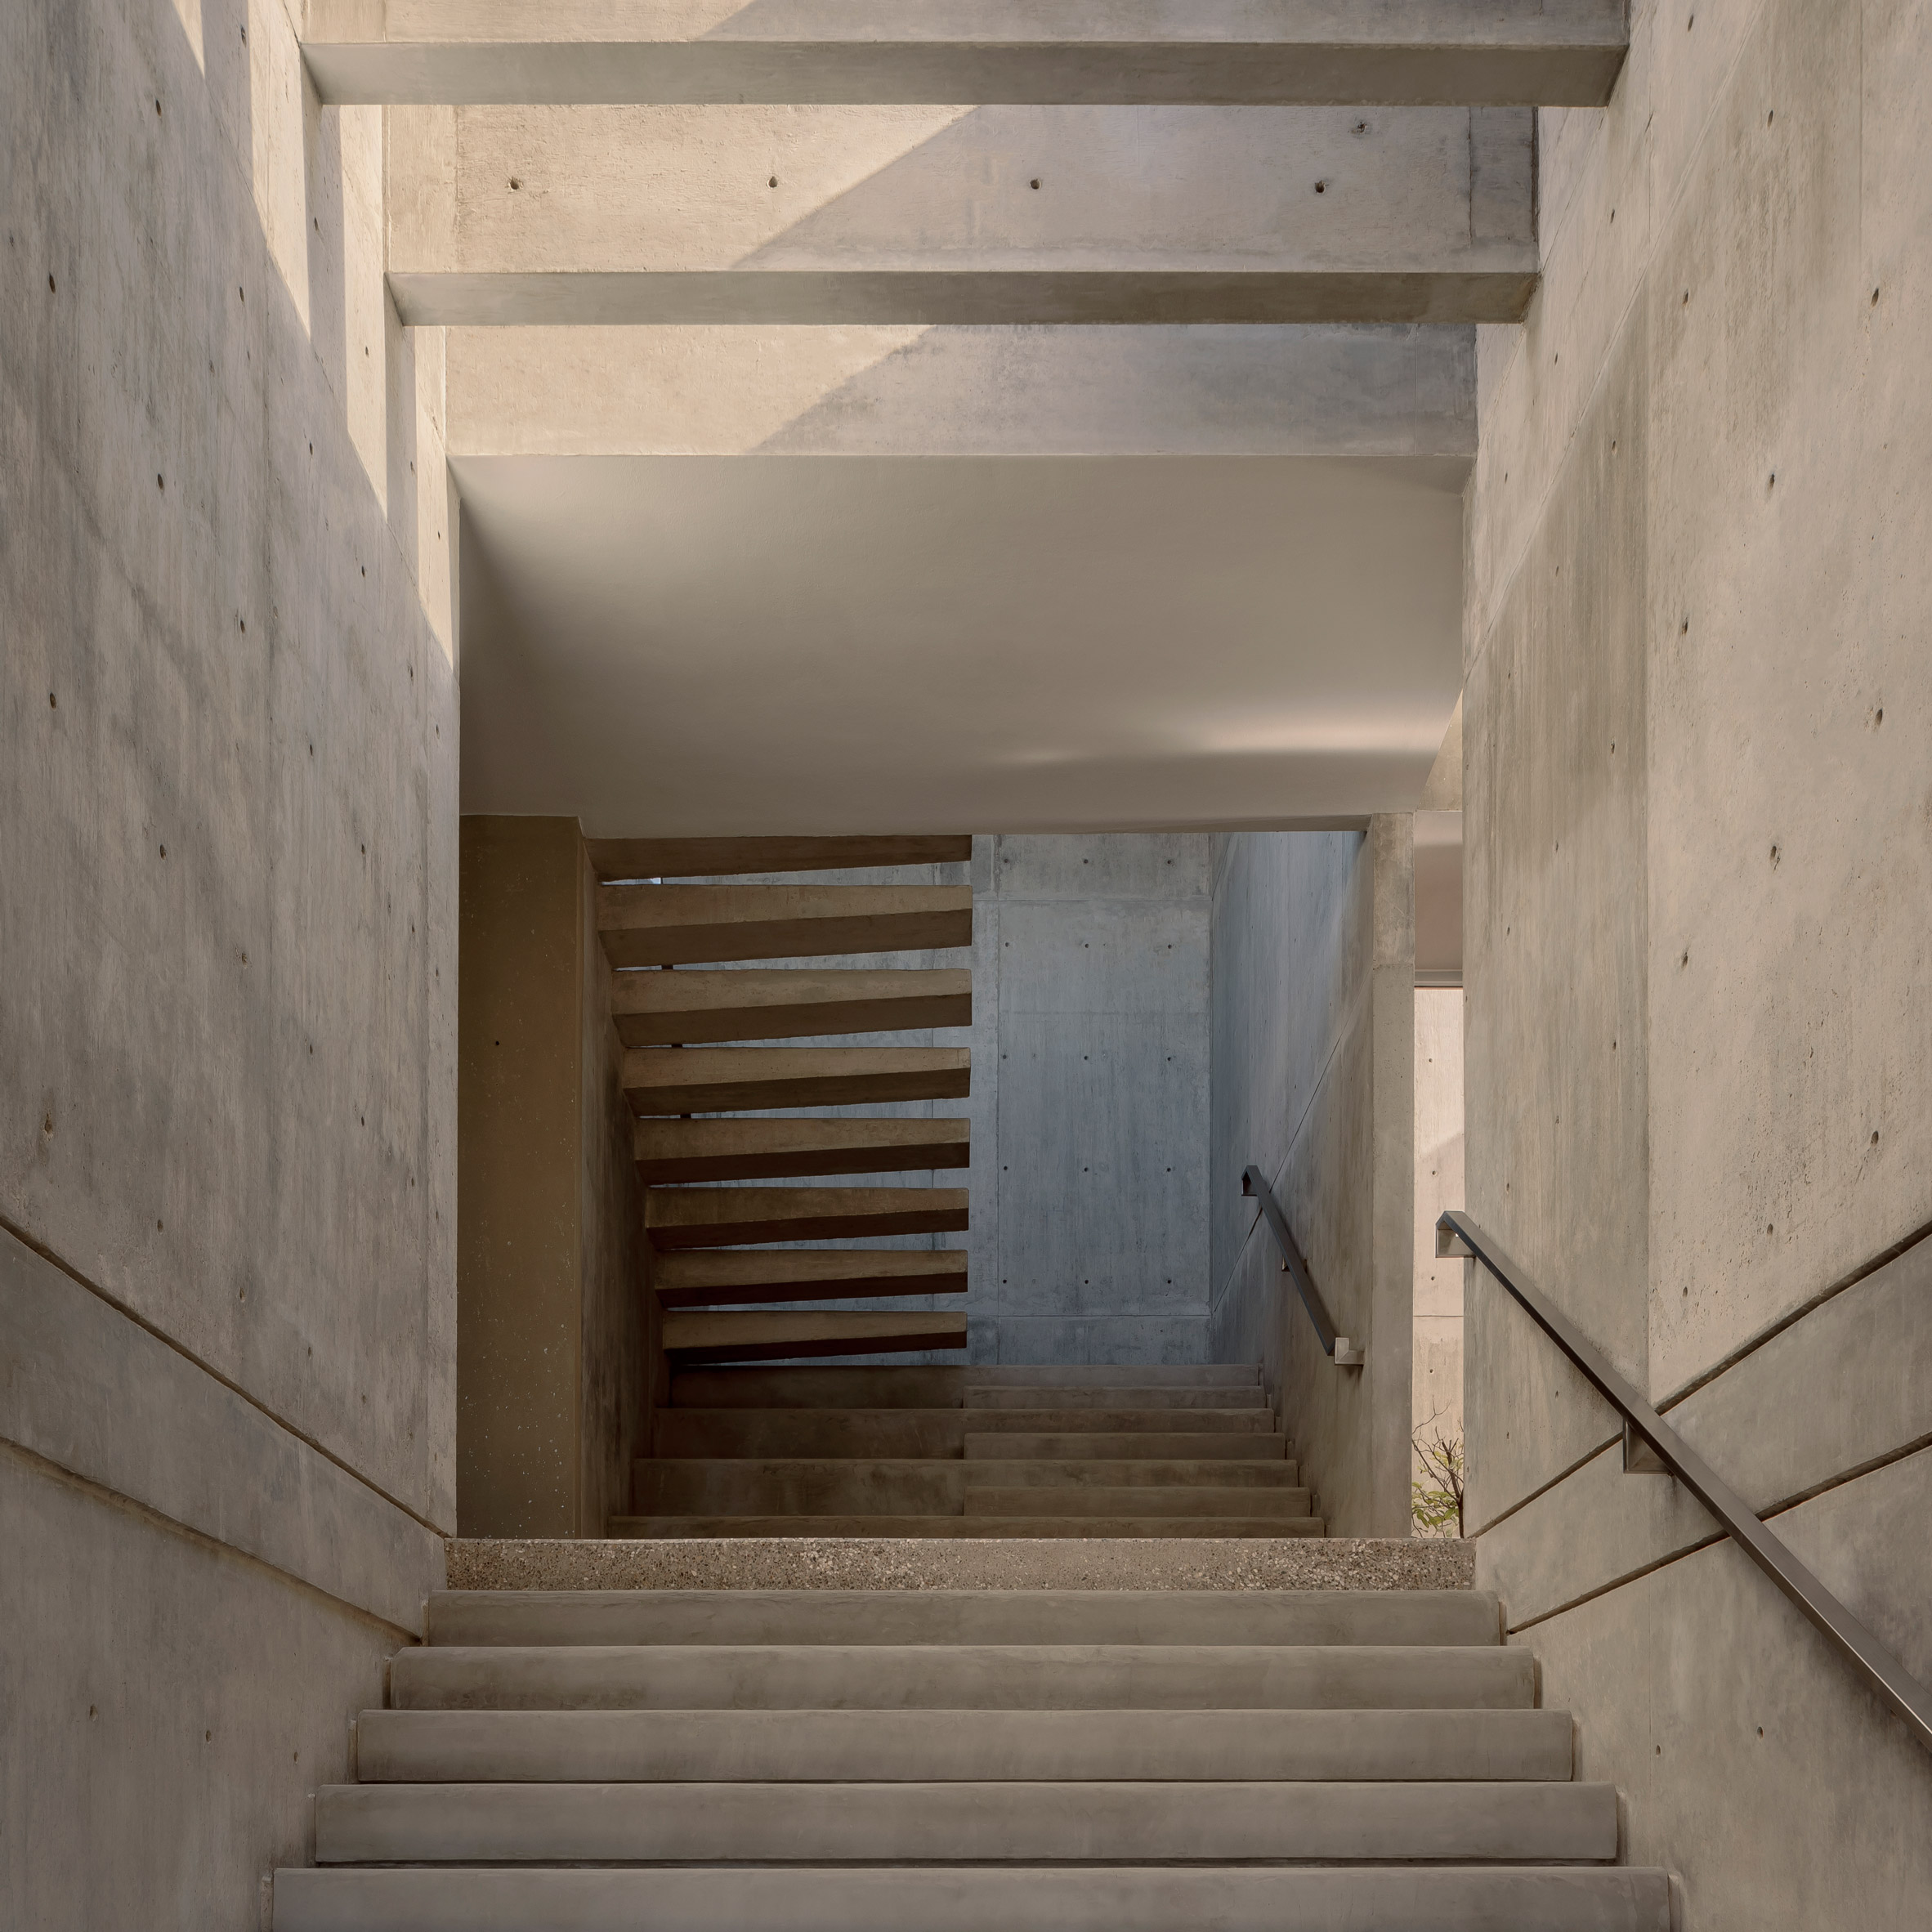 Statement staircase with floating concrete treads